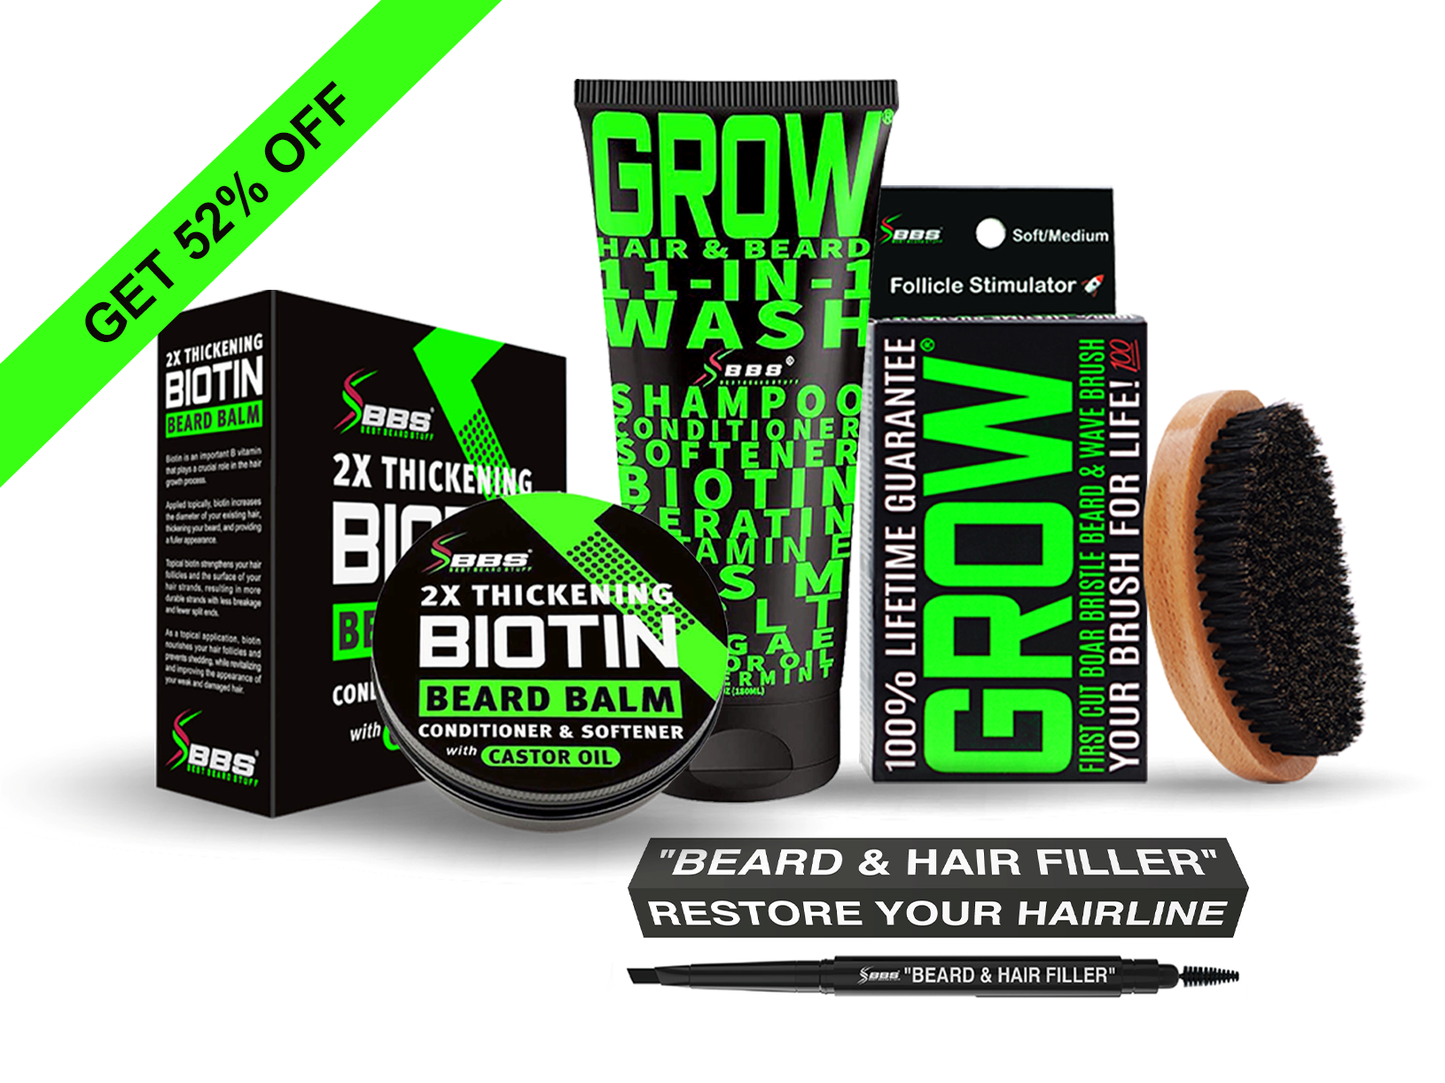 SPECIAL OFFER!!! EPICALLY BEARDED 2X Thickening BIOTIN Beard Balm Kit Upgrade